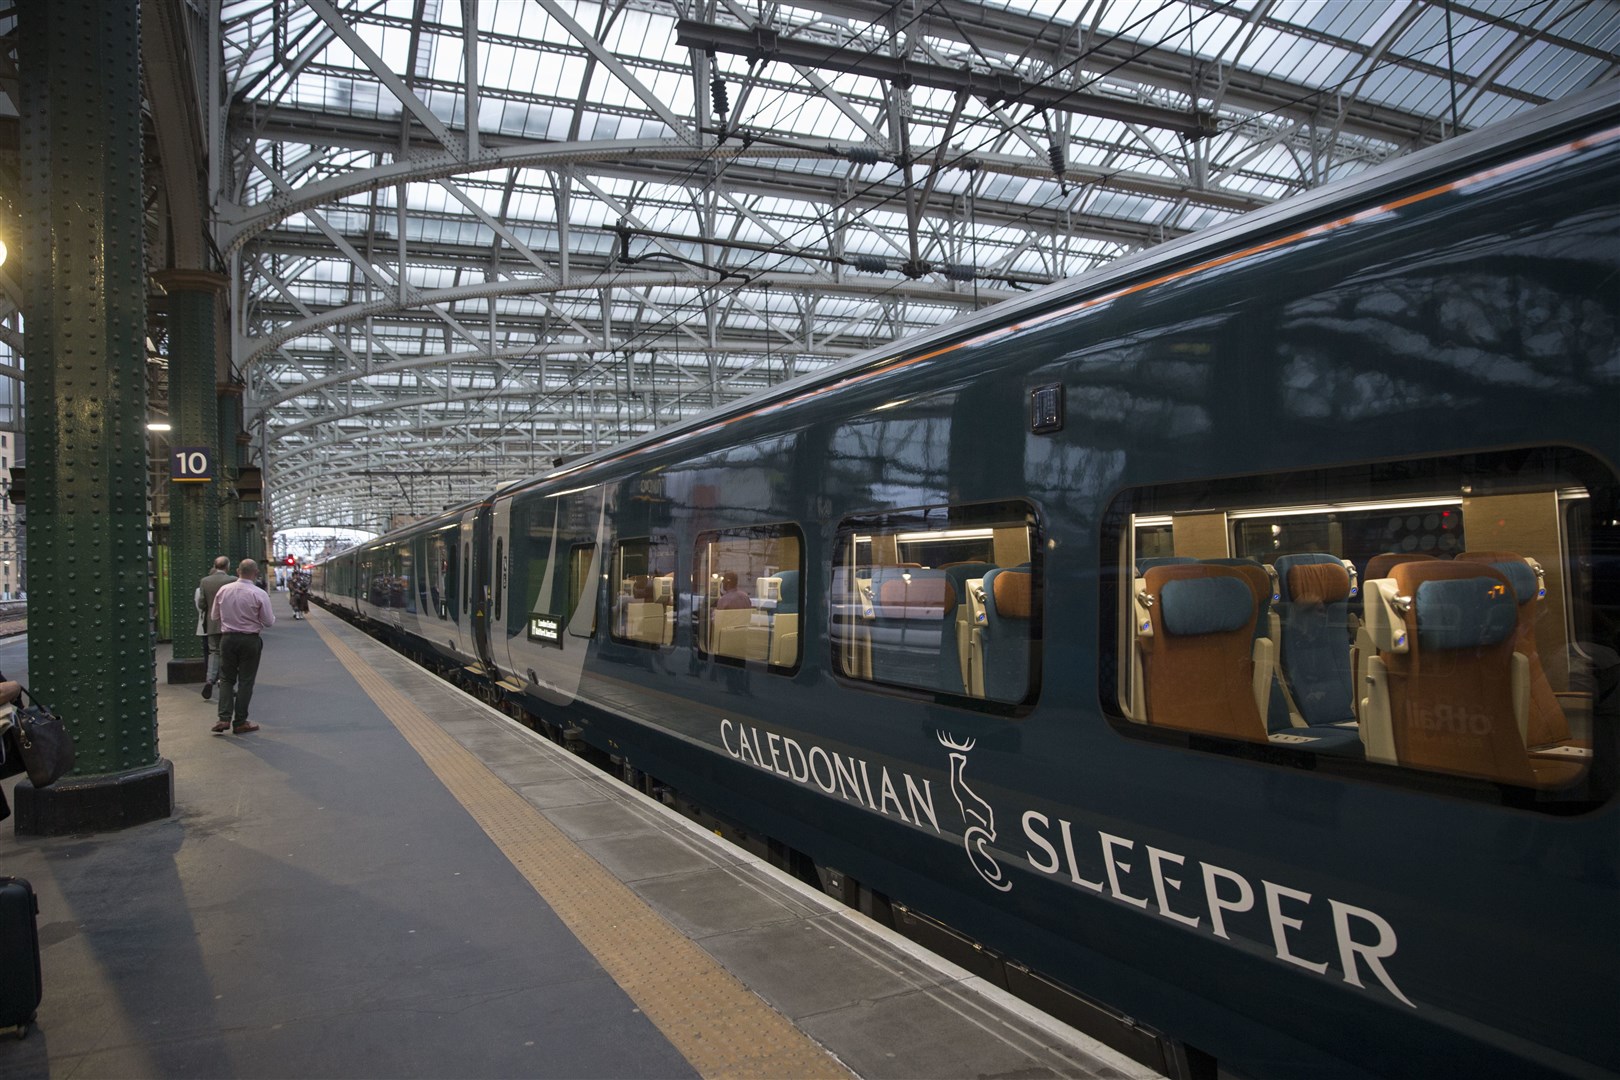 The Scottish Government will operate the Caledonian Sleeper service from the end of June.